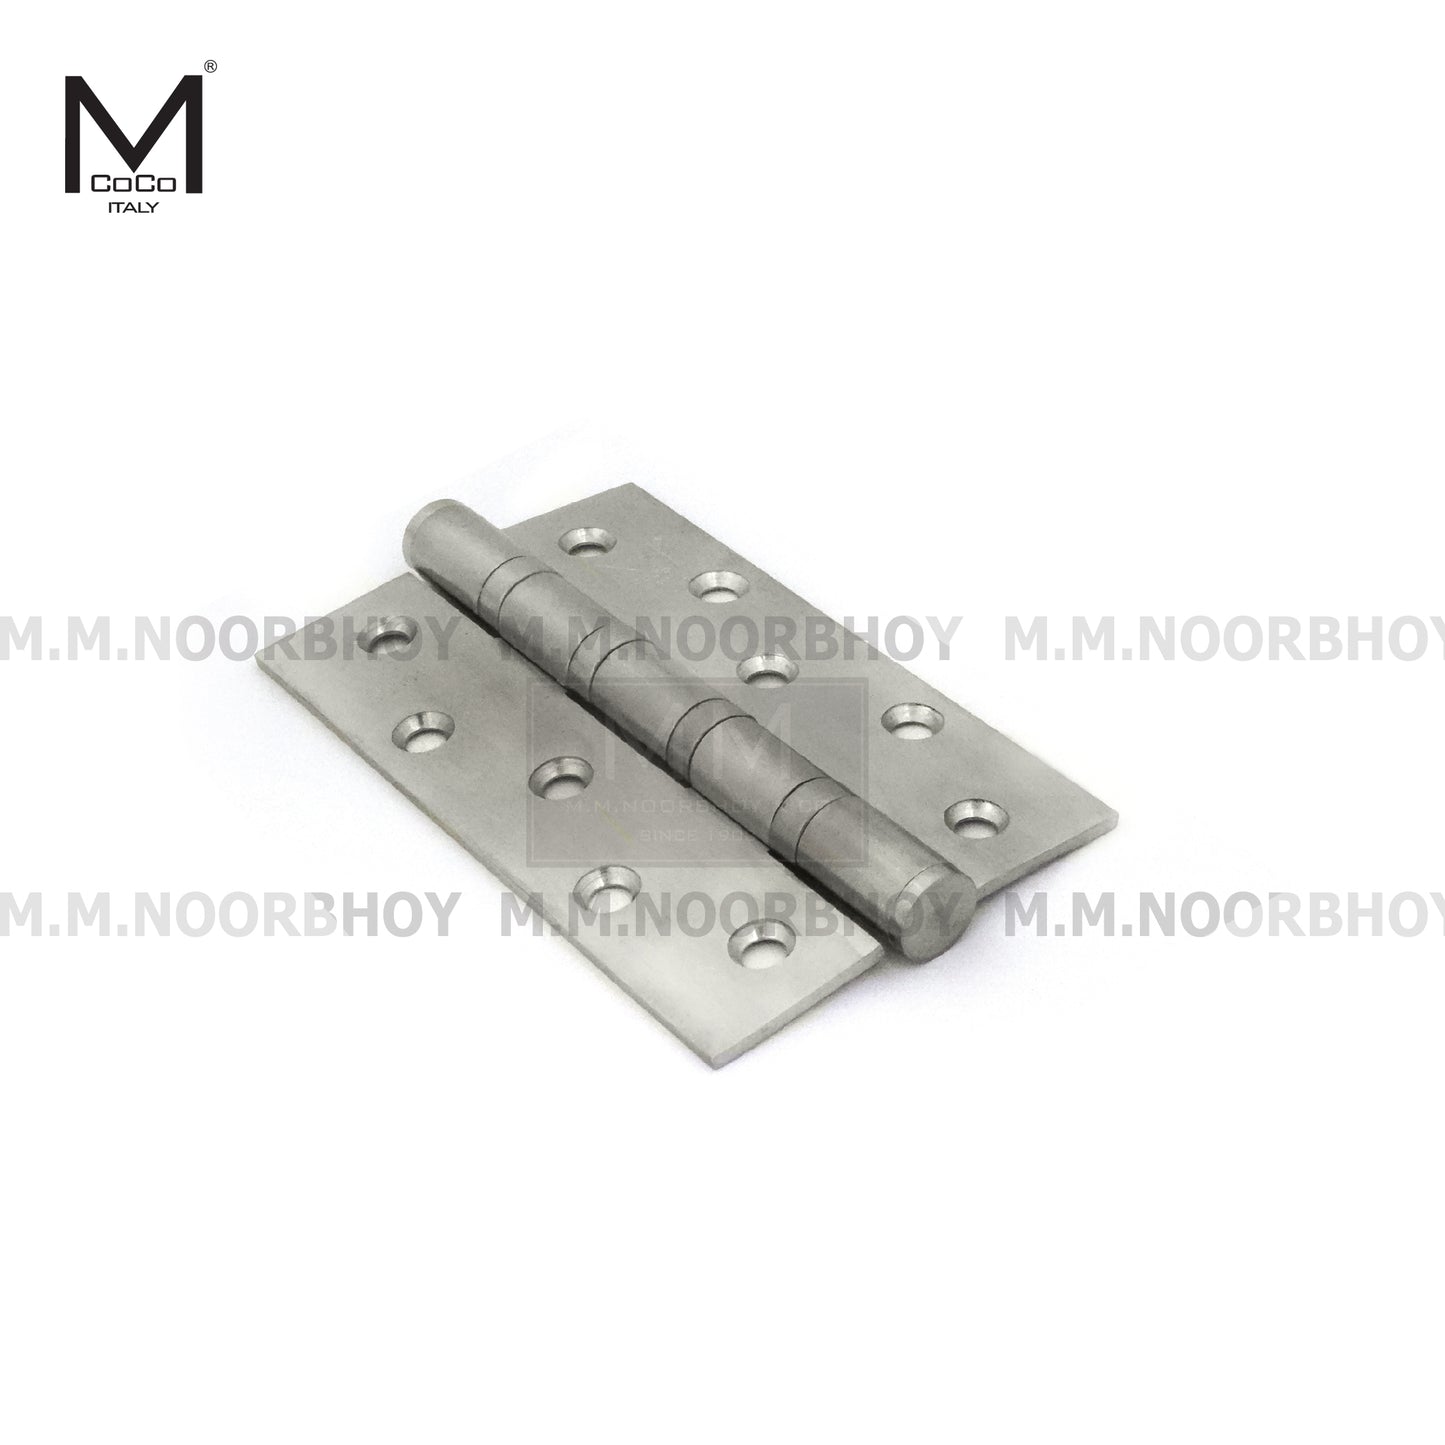 Mcoco Door Hinges With Ball Bearing Size 4x3 to 5x4 Inches Stainless Steel 316 Grade - GS